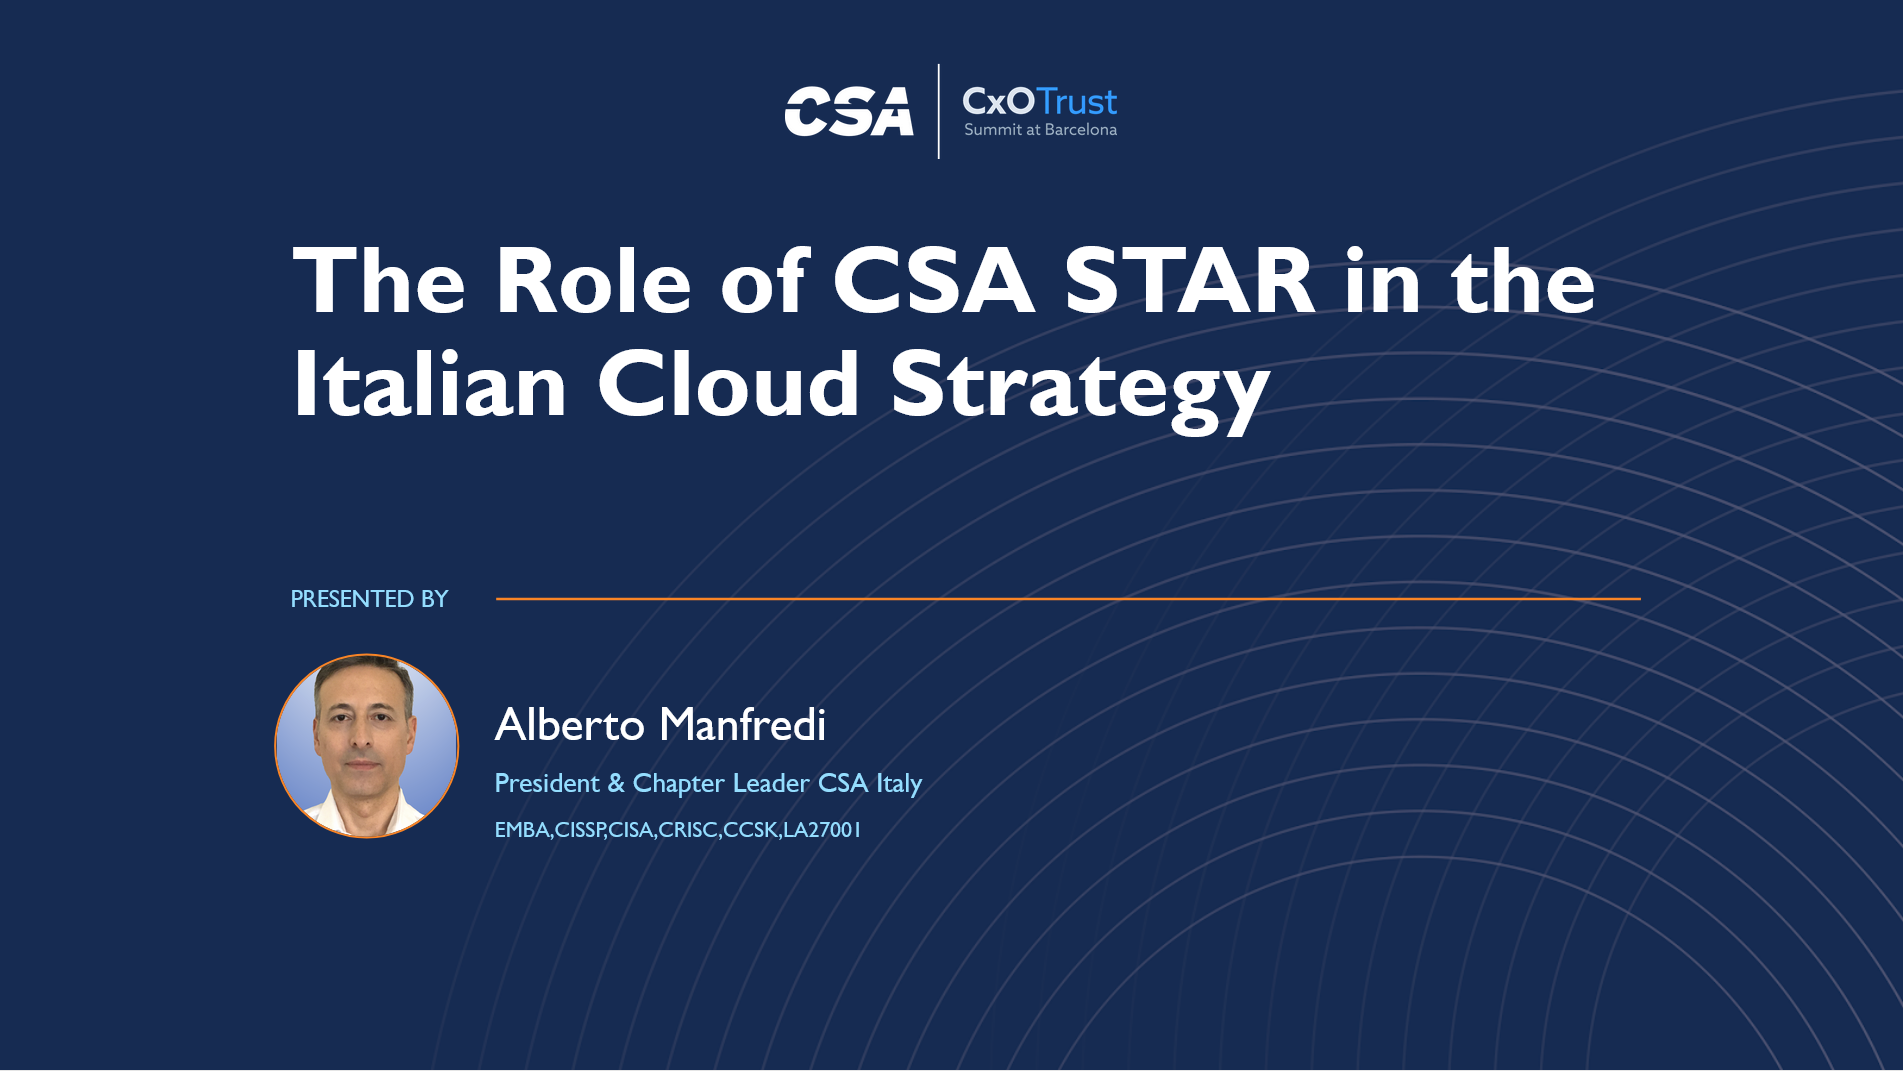 The Role of CSA STAR in the Italian Cloud Strategy